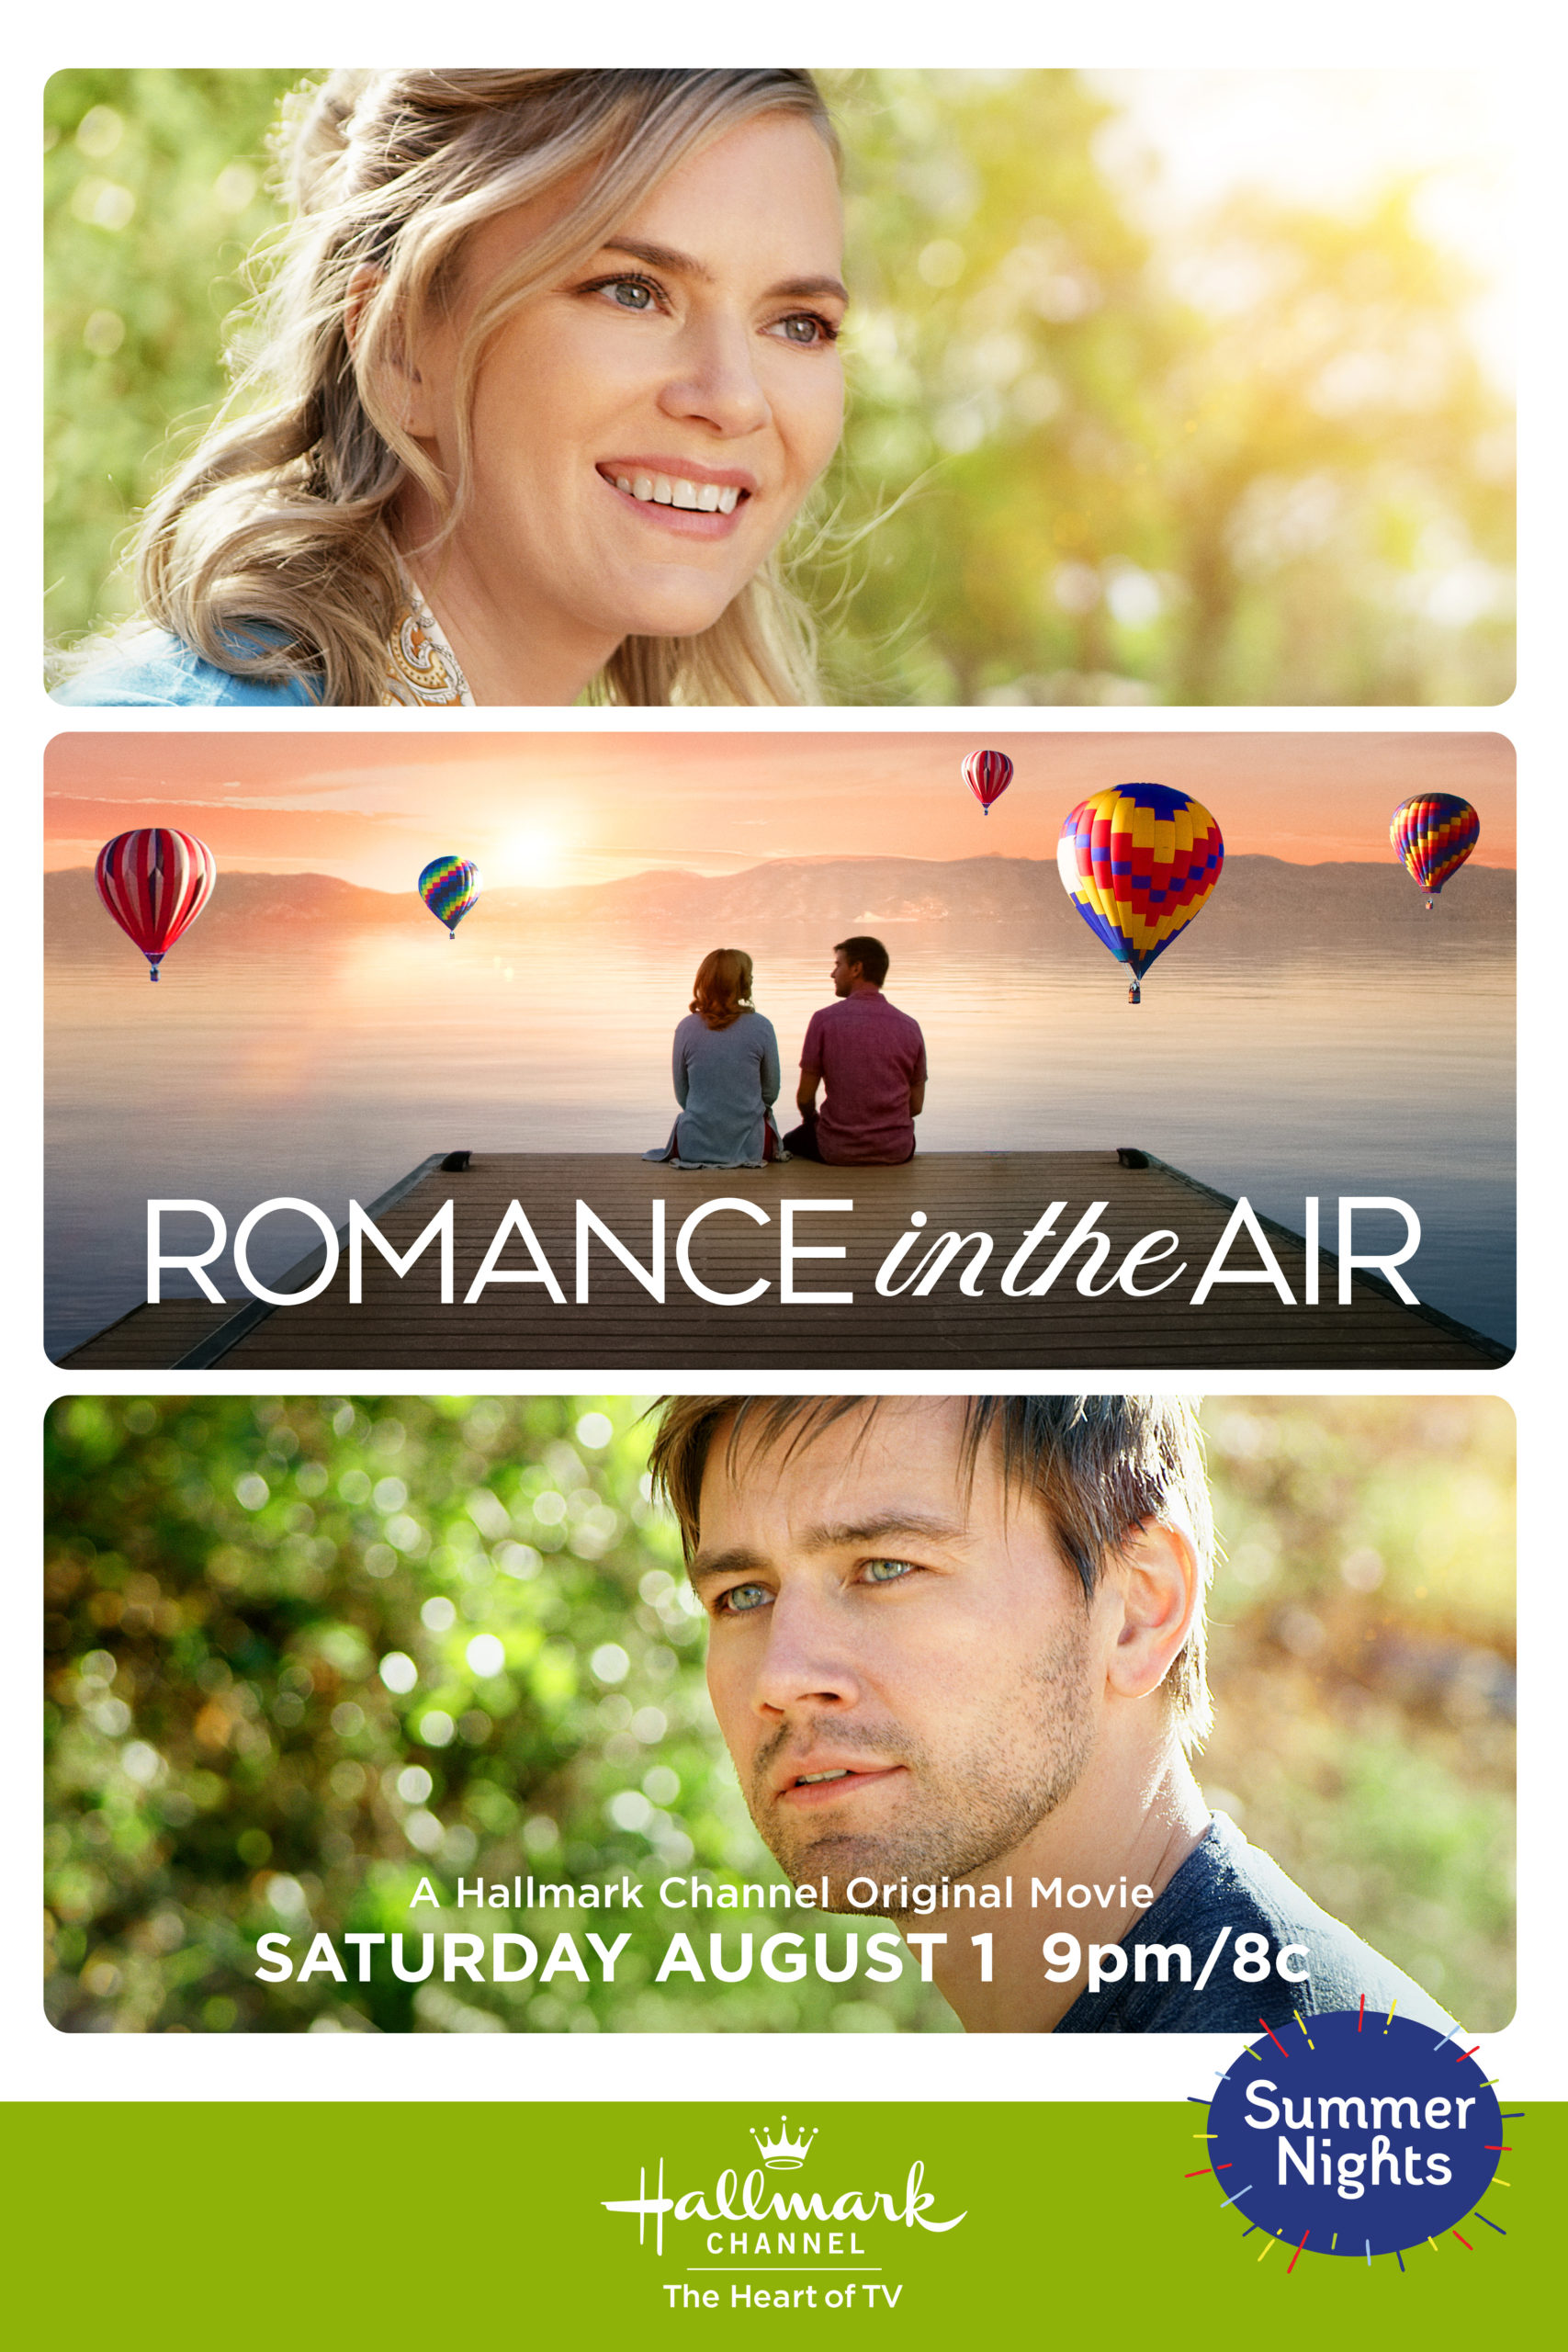 Romance in the Air Movie Poster 2020